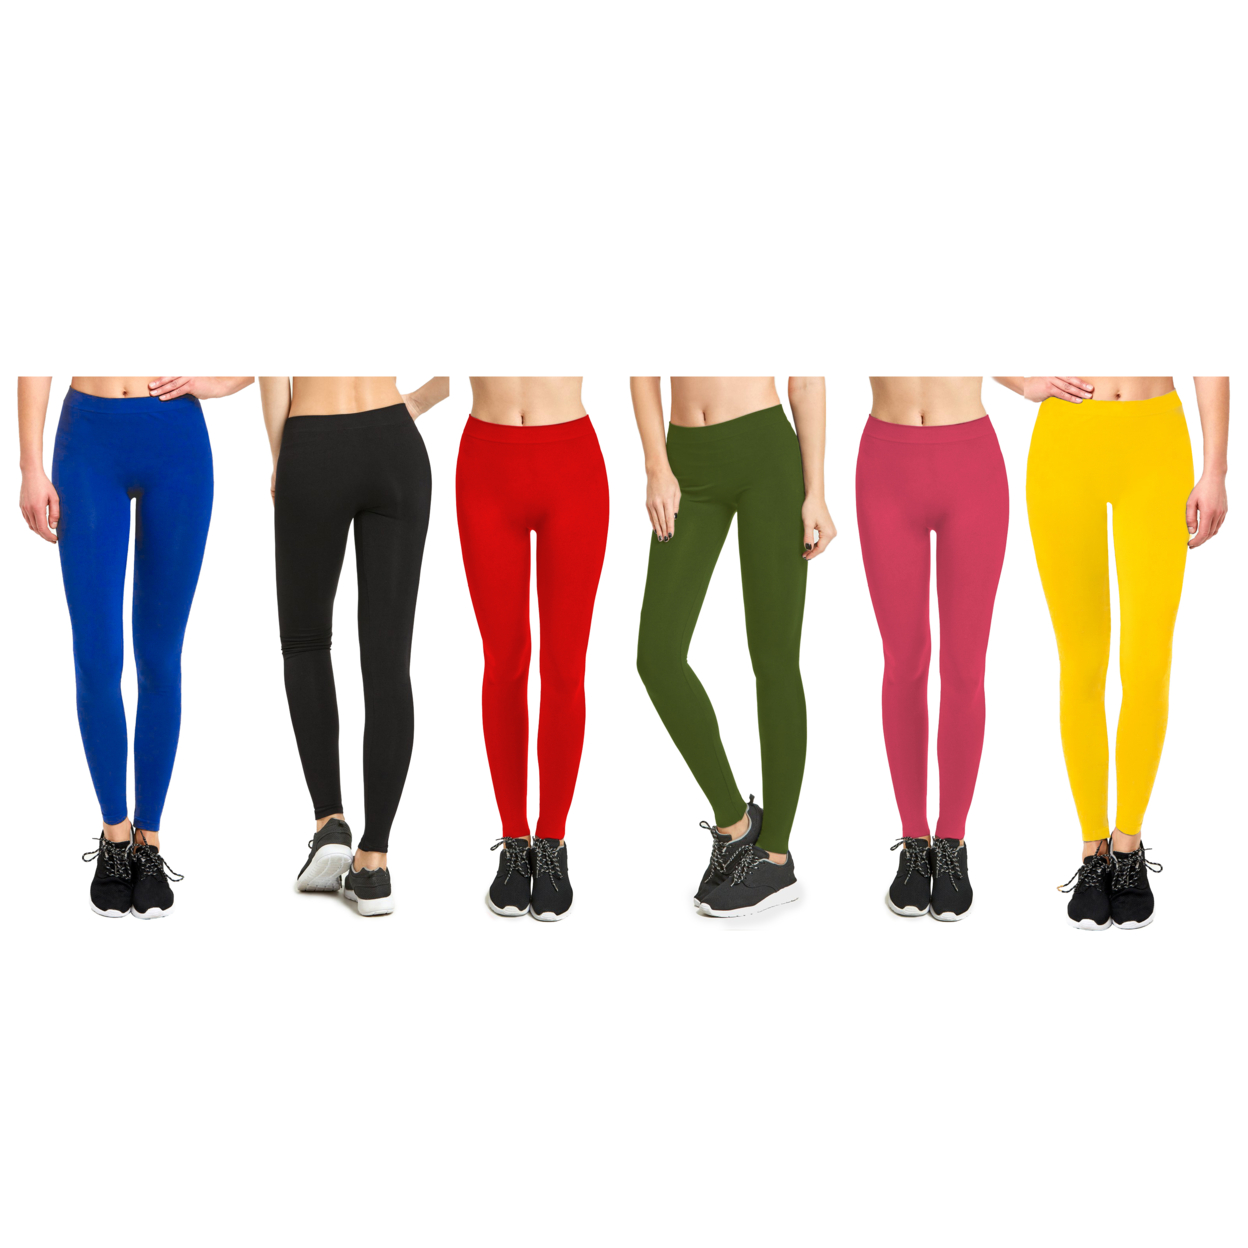 4-Pack: Women's Slim Fit Comfy Stretchy Elastic Waistband Leggings - Small, Solid